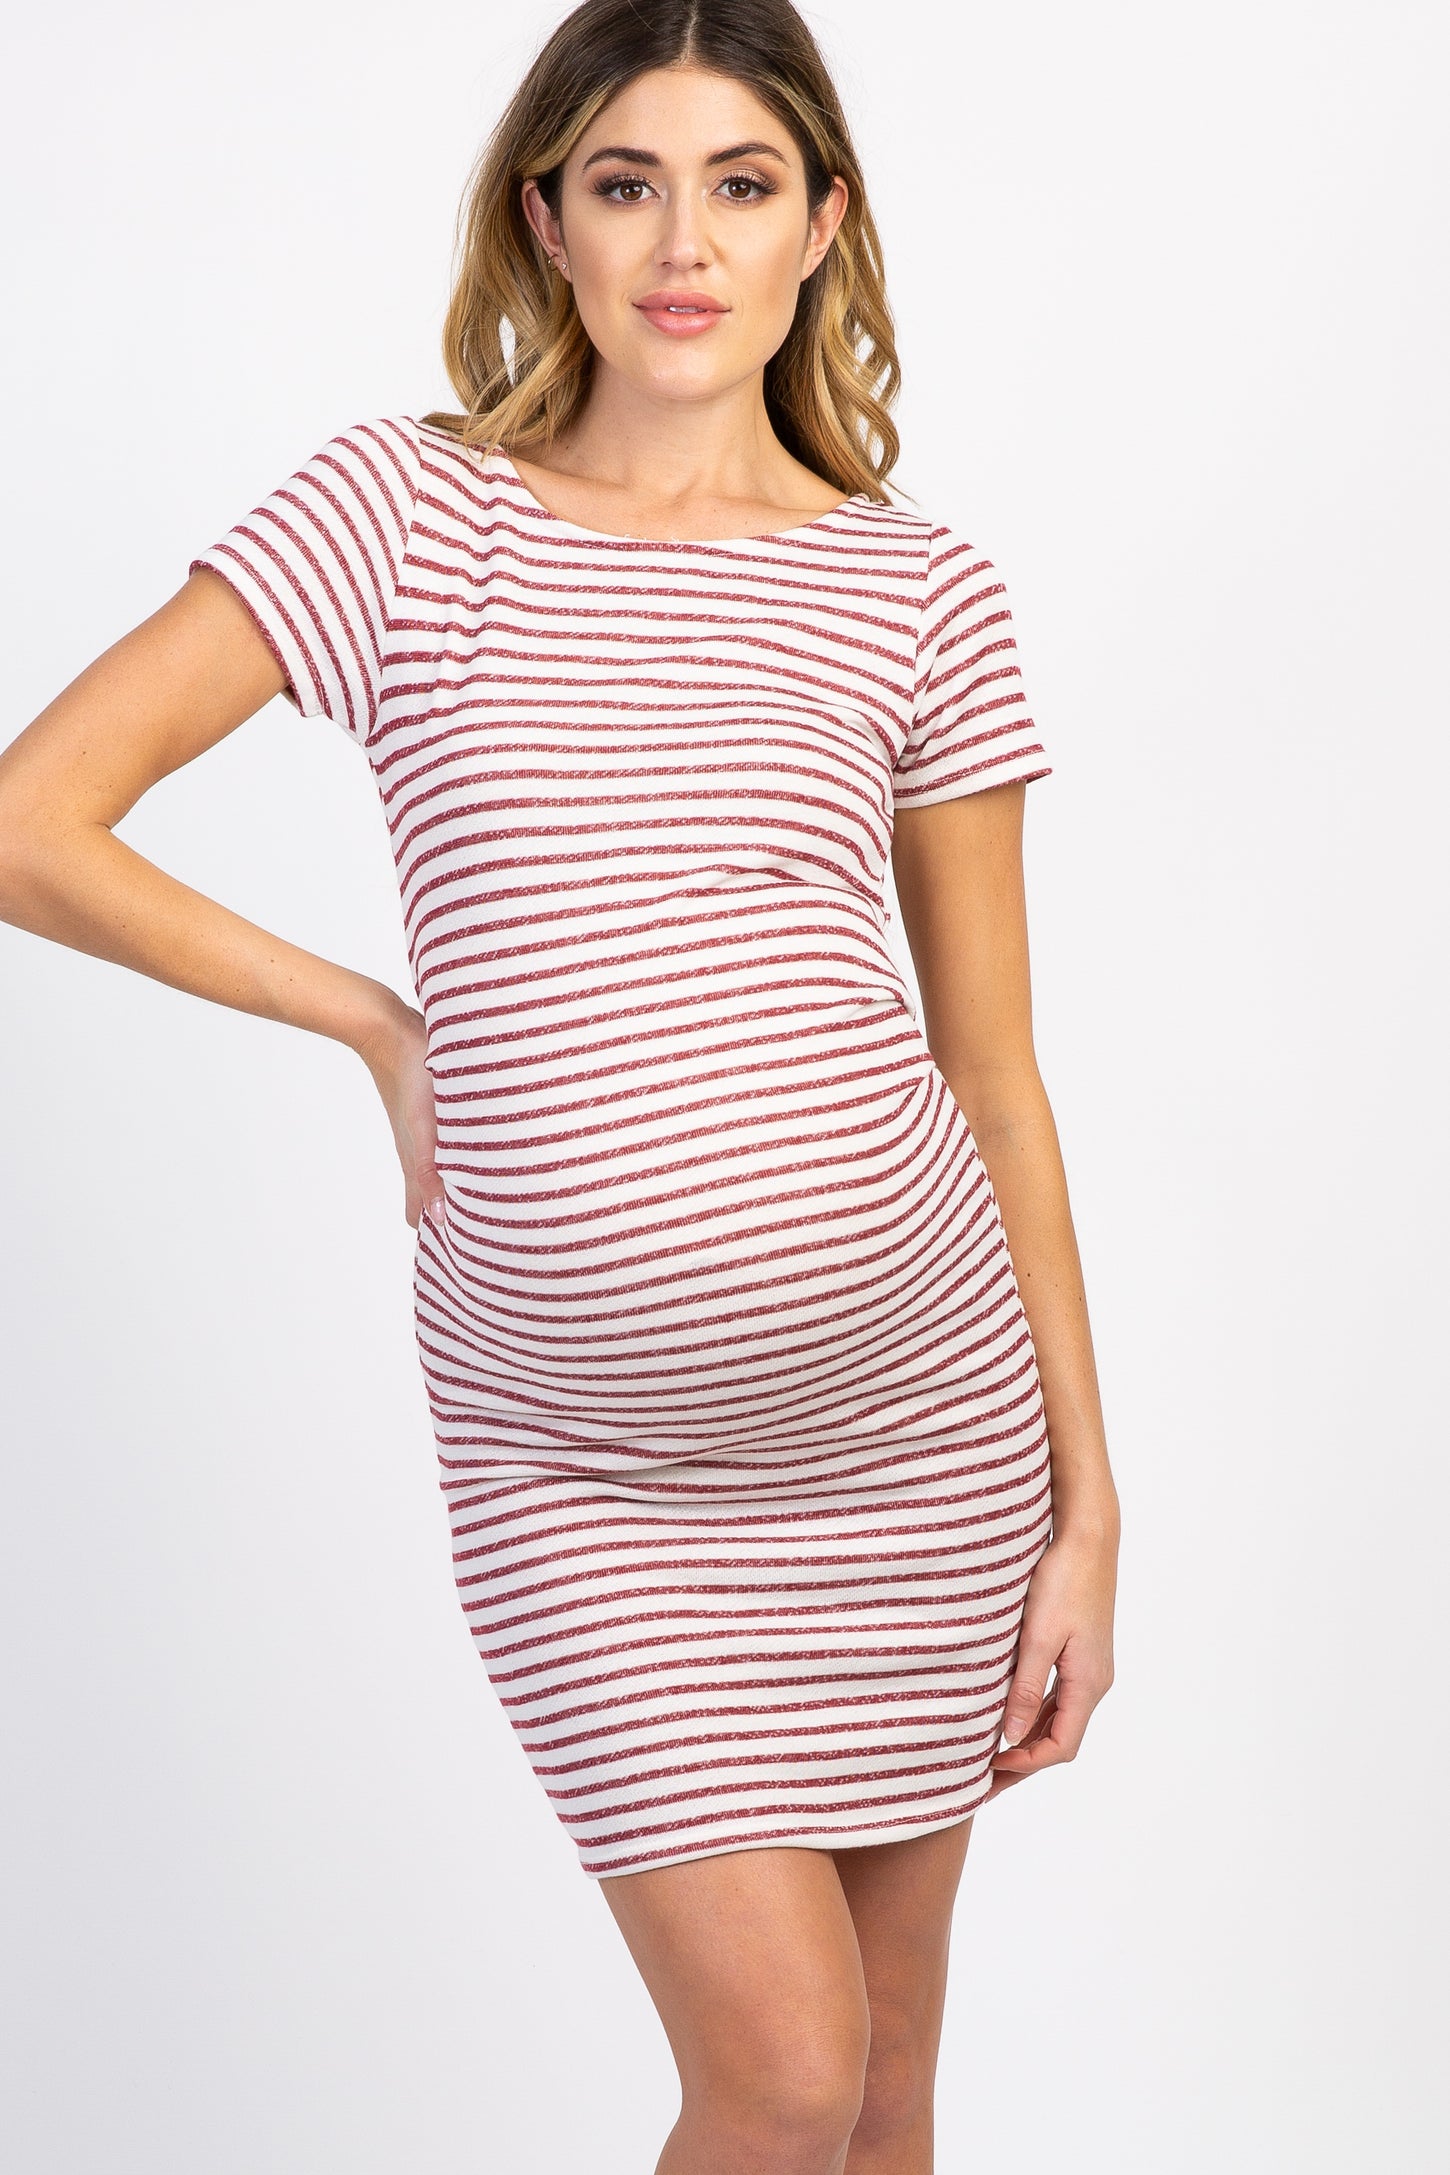 Ivory Burgundy Striped Fitted Short Sleeve Maternity Dress